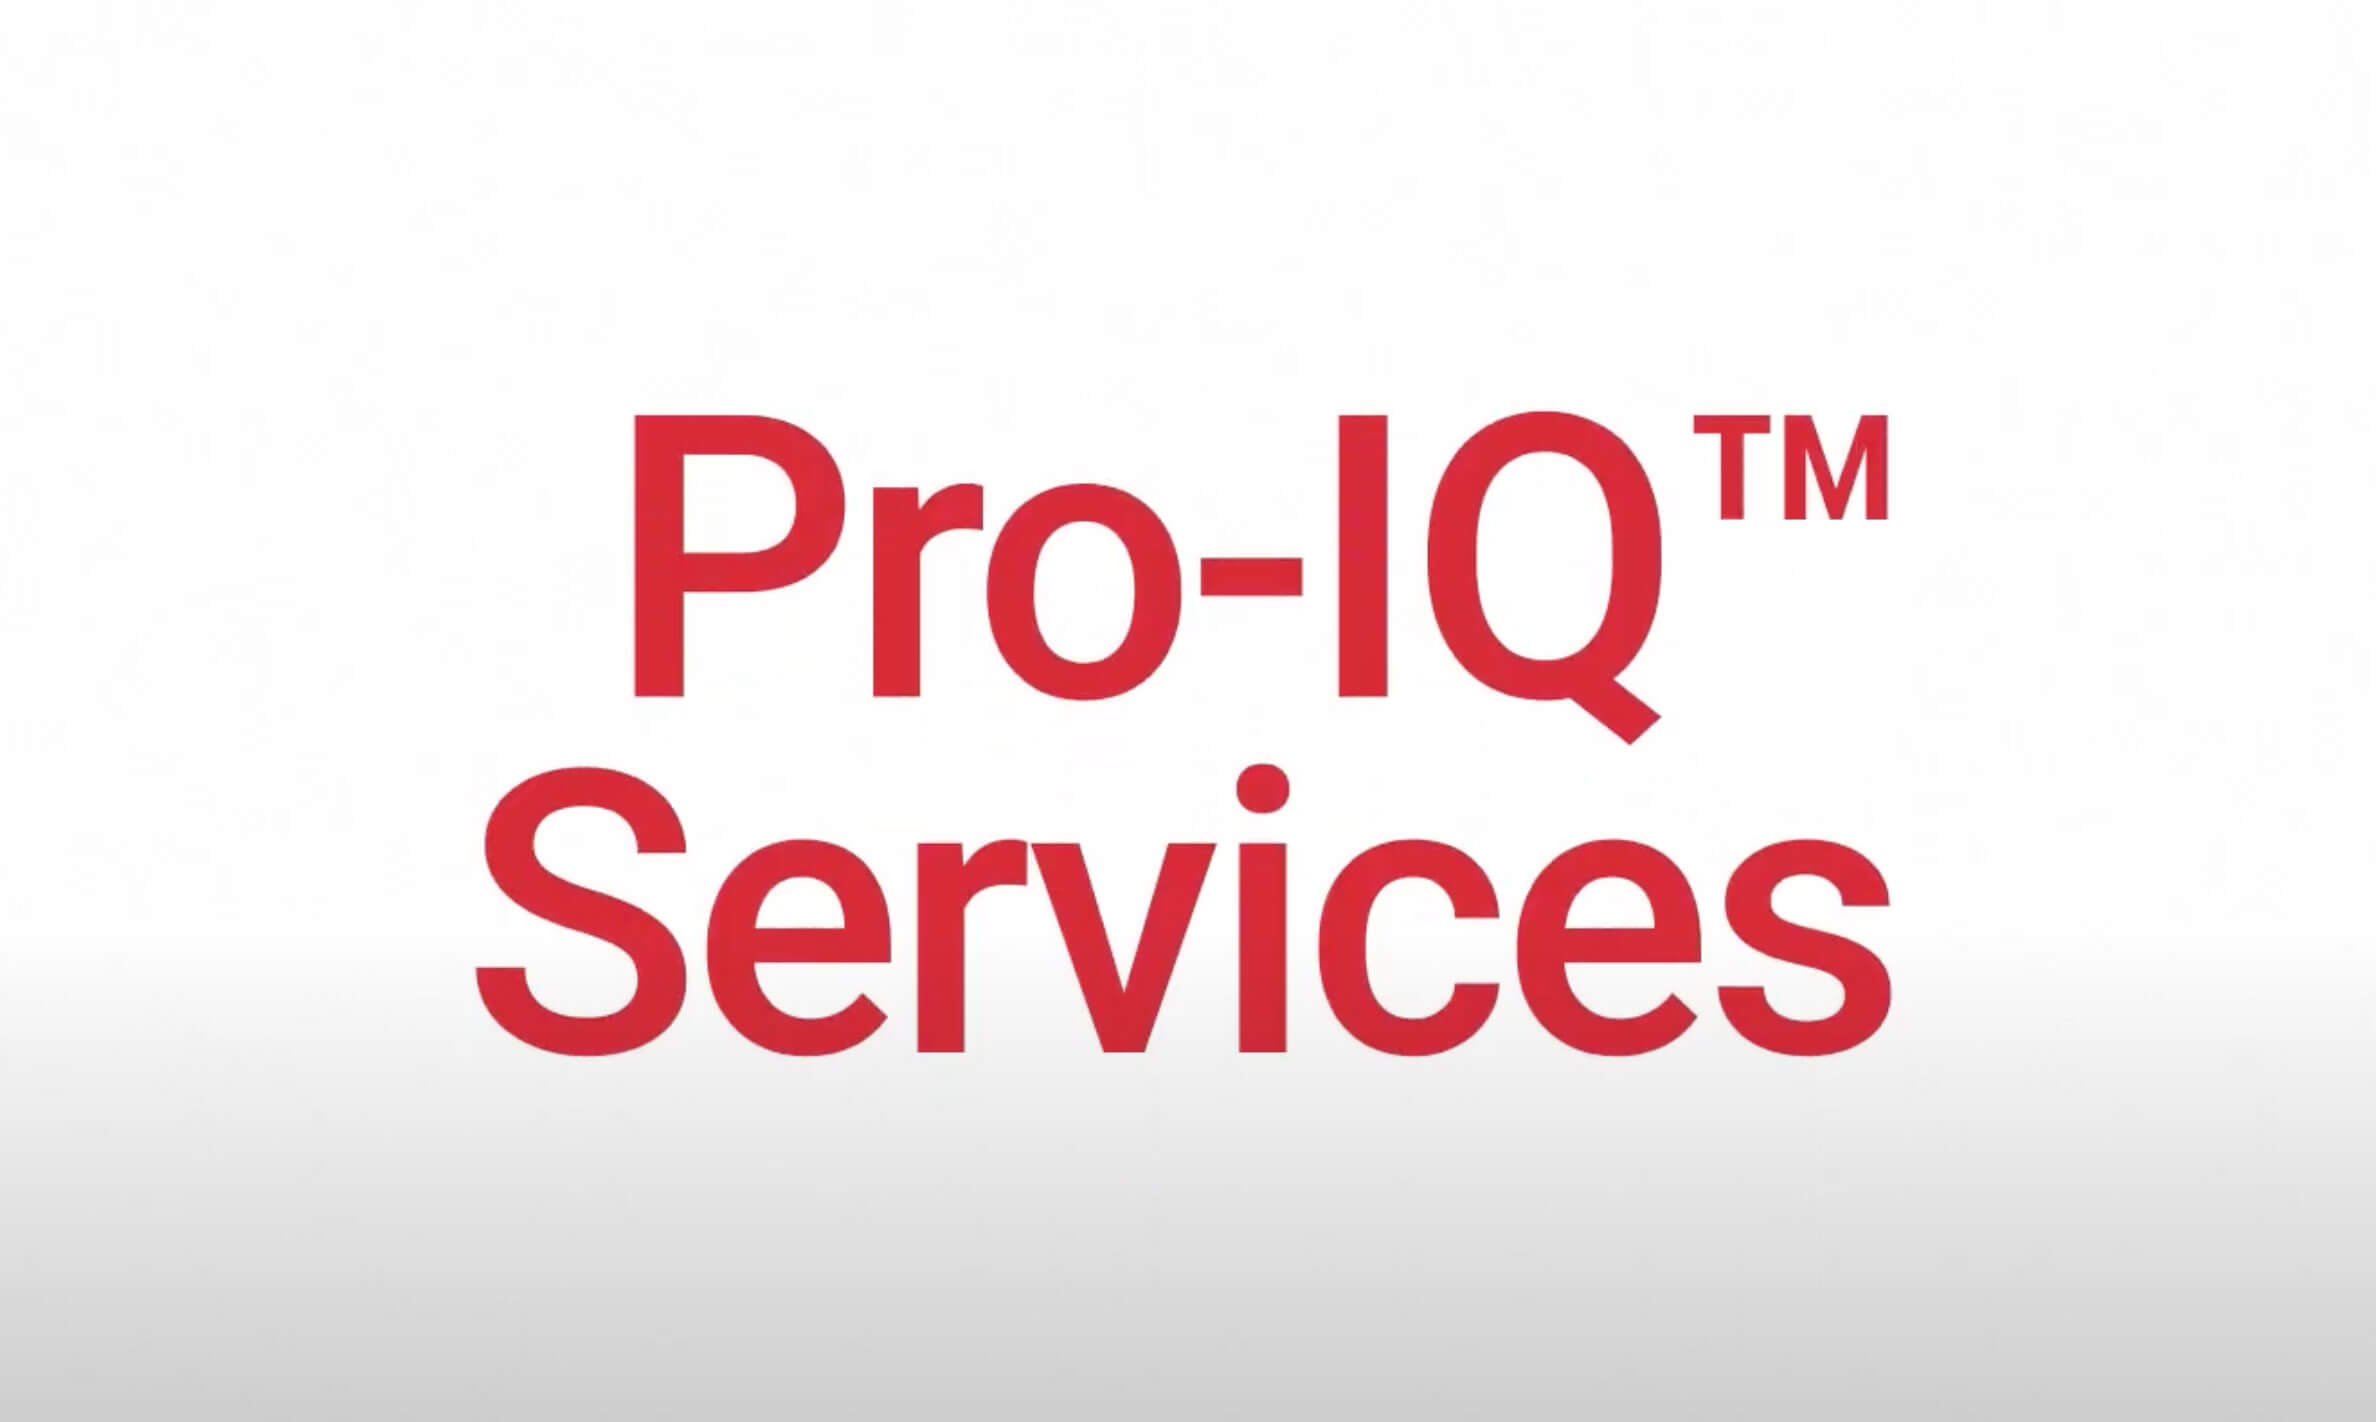 Thumbnail of Pro-IQ Services video